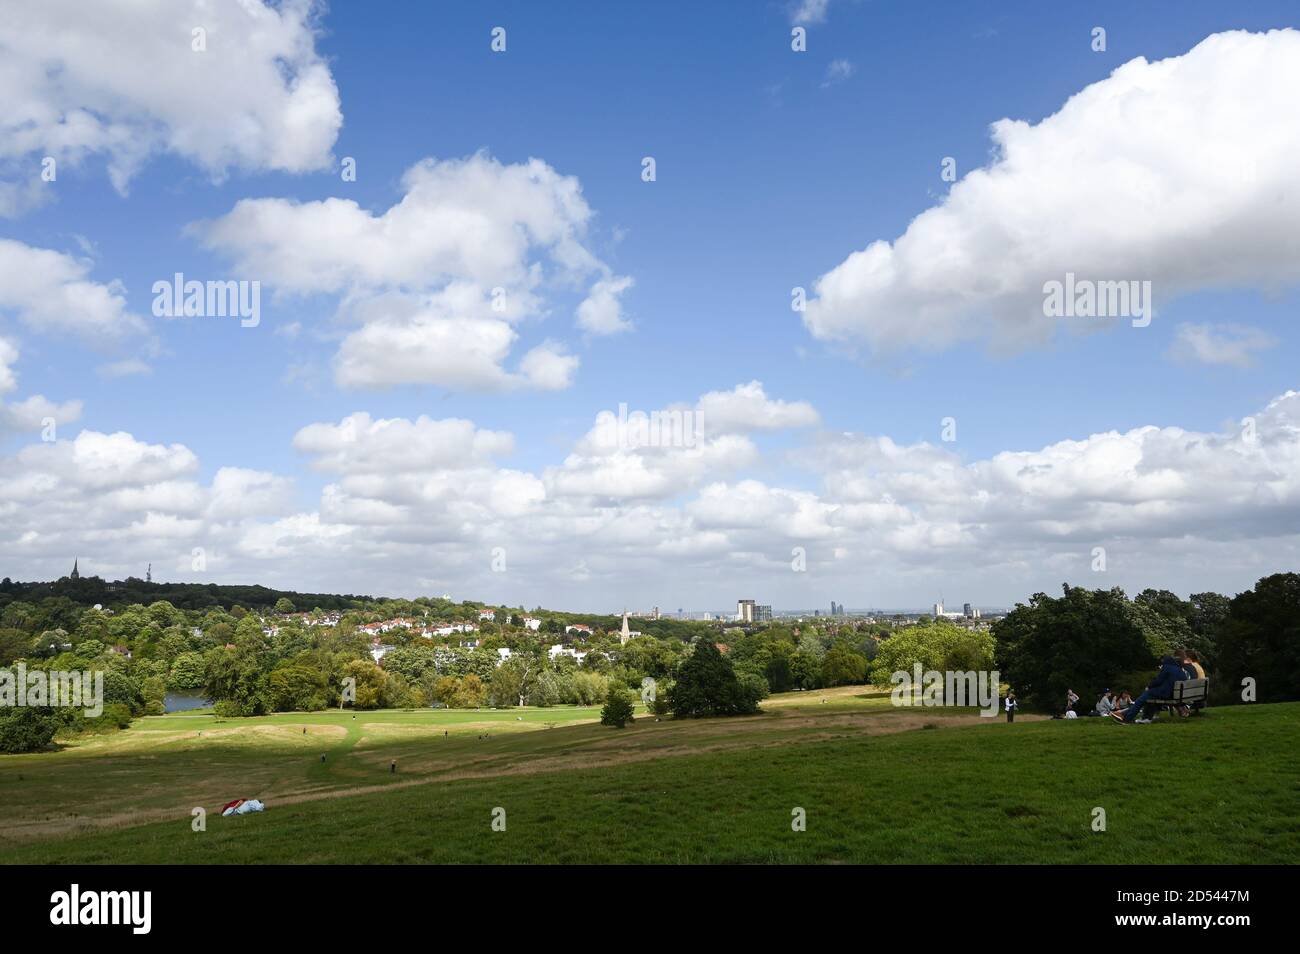 View from Hampstead Heath towards Highgate and Dartmouth Park, London UK. Stock Photo